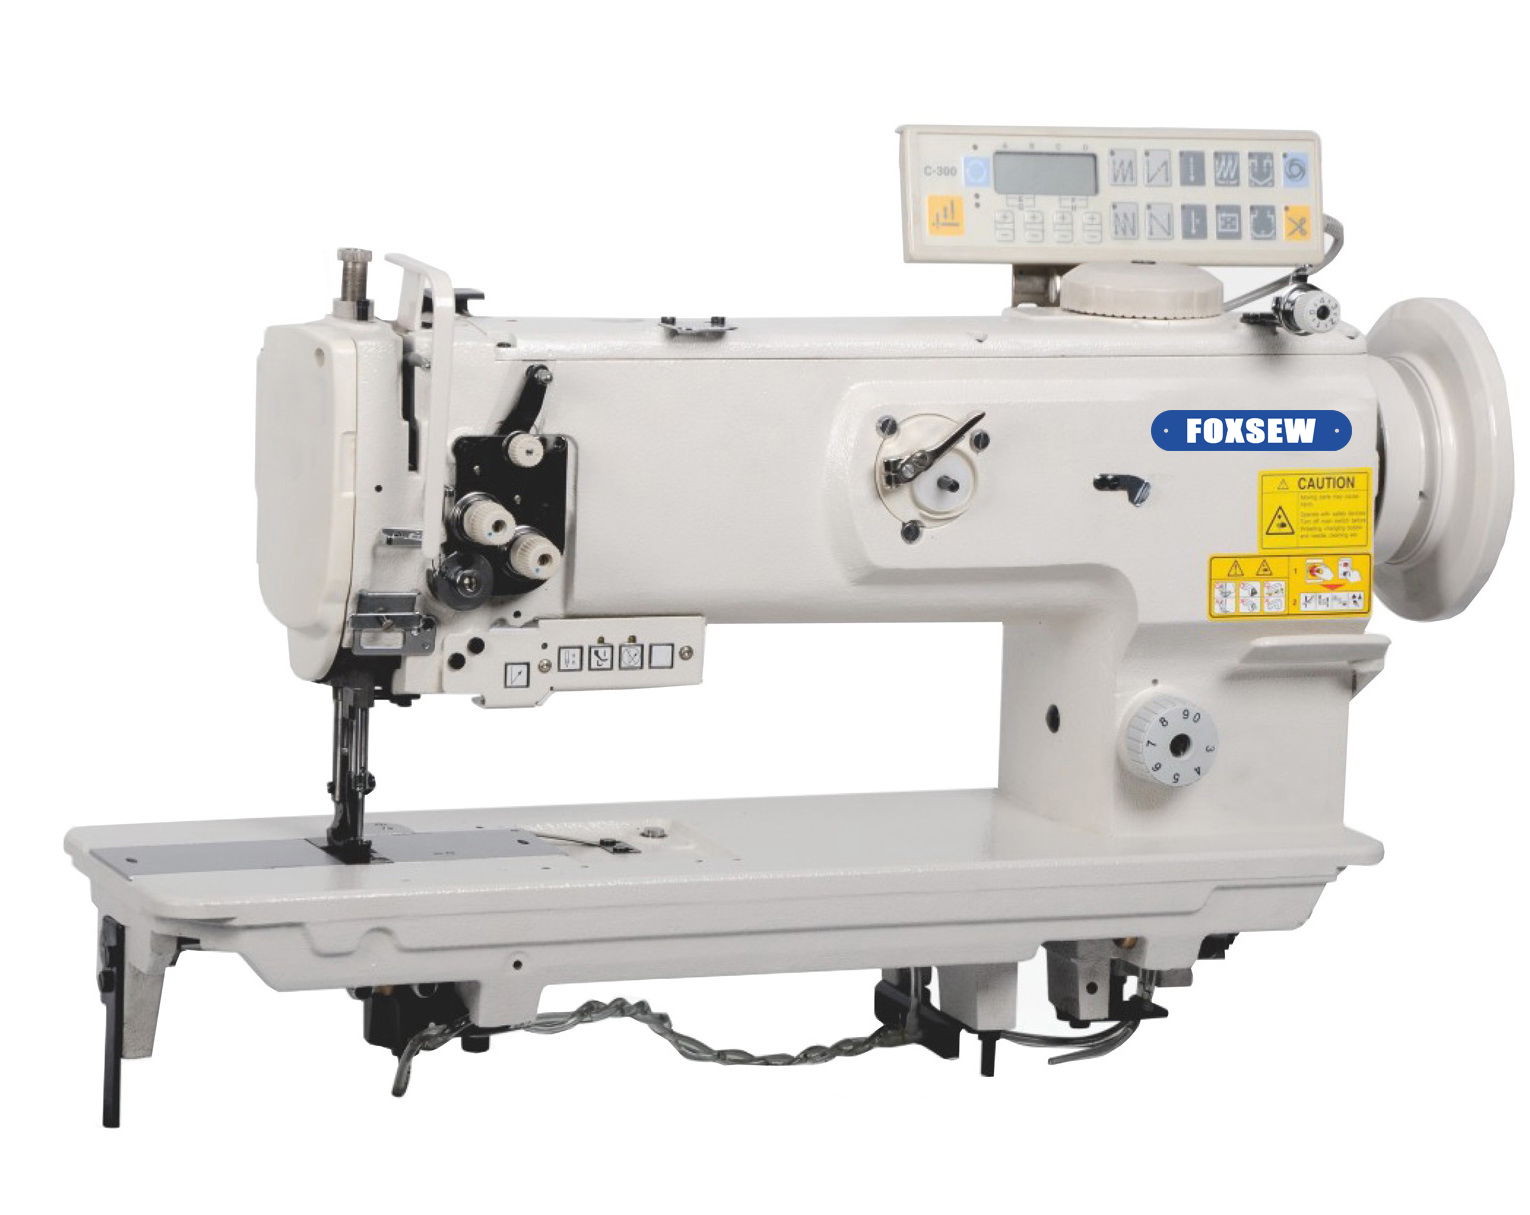 KD-1510N-L14-7 Single Needle Heavy Duty Sewing Machine with Auto Trimme